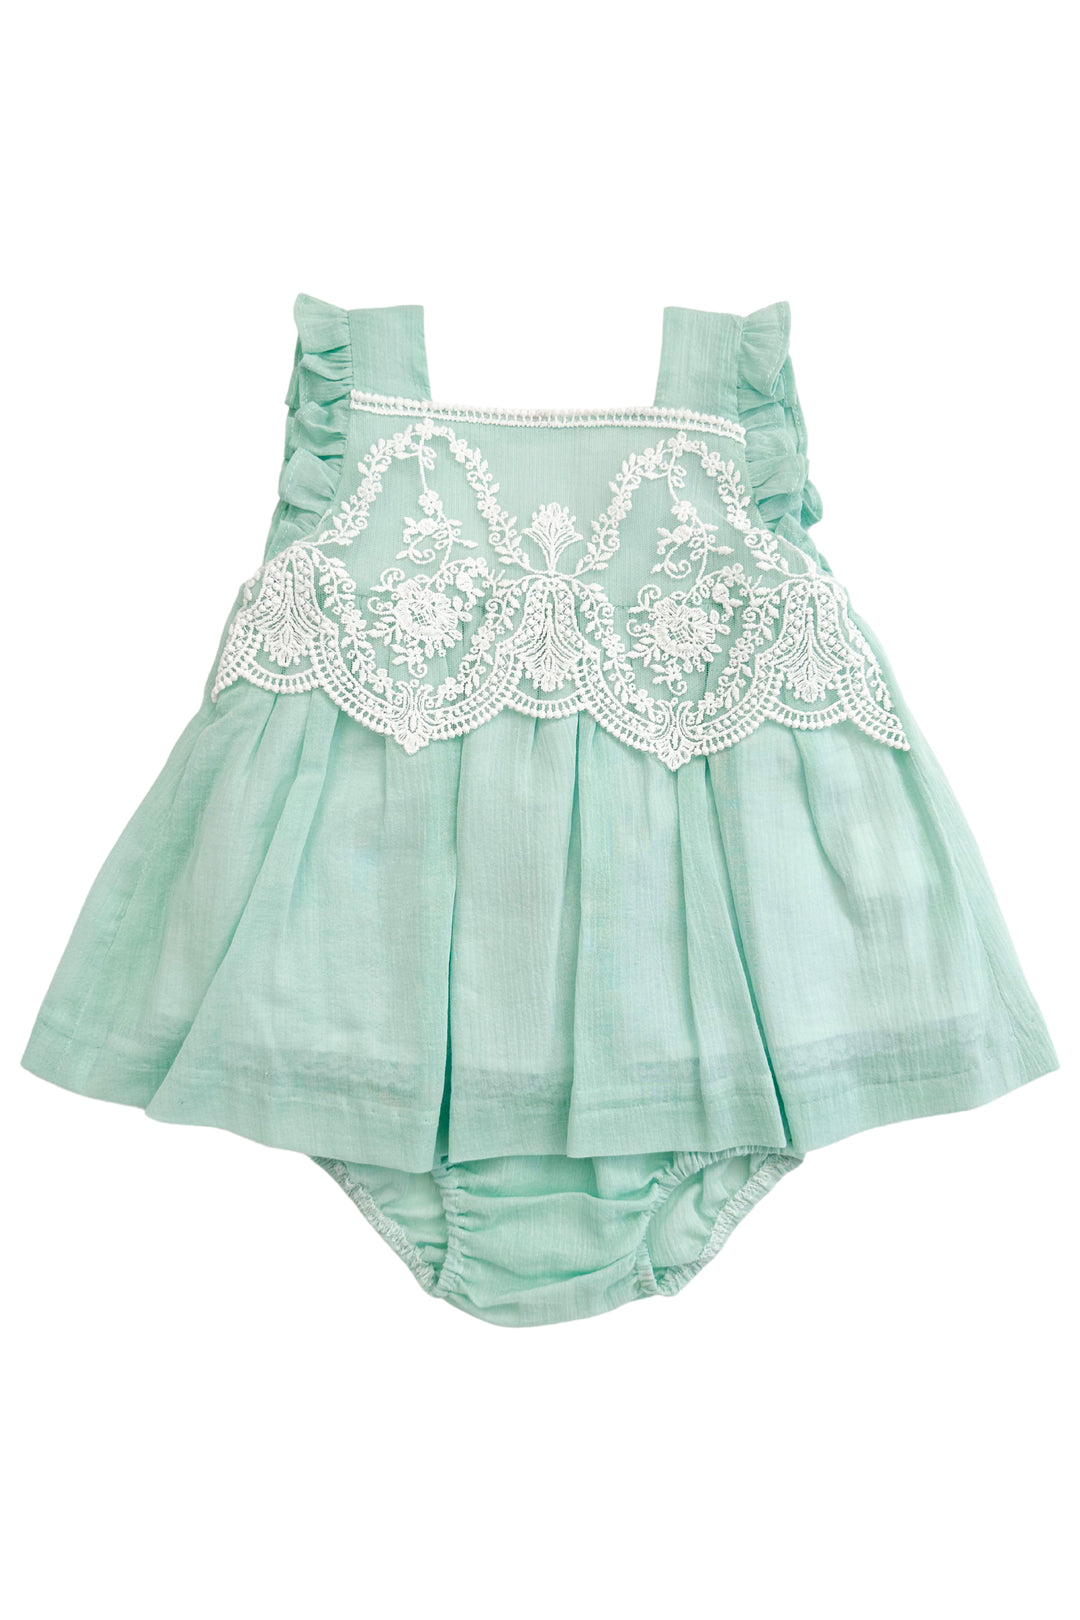 Foque "Alice" Duck Egg Lace Dress & Bloomers | Millie and John